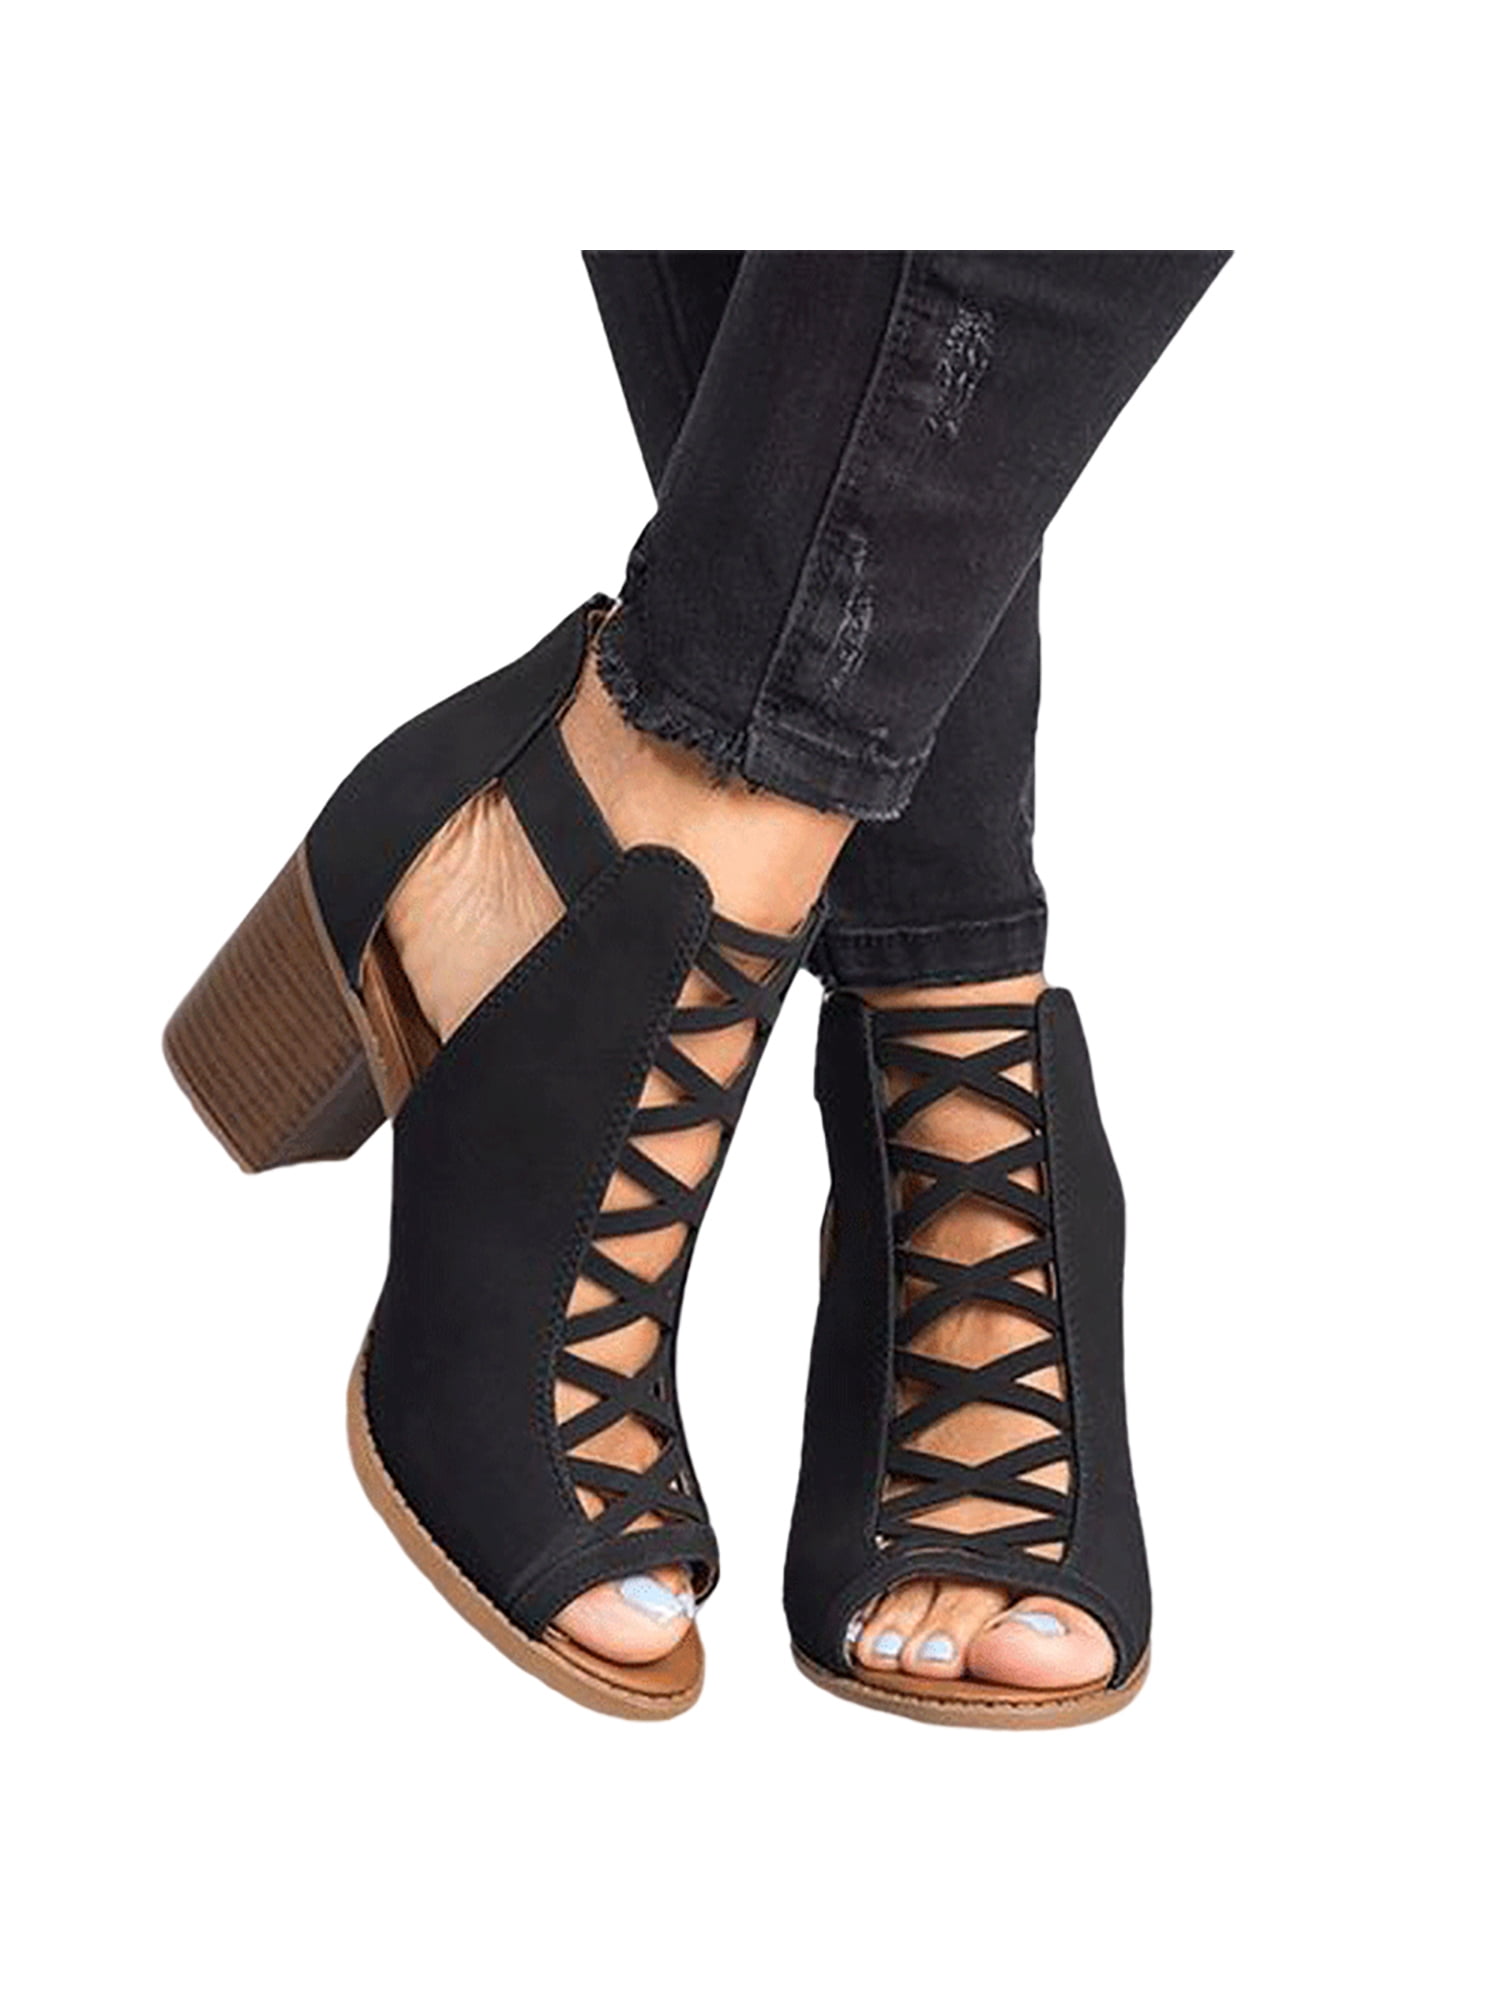 NEW WOMENS LADIES MID LOW BLOCK HEEL CHUNKY LACE UP CUT OUT GLADIATOR SHOES SIZE 